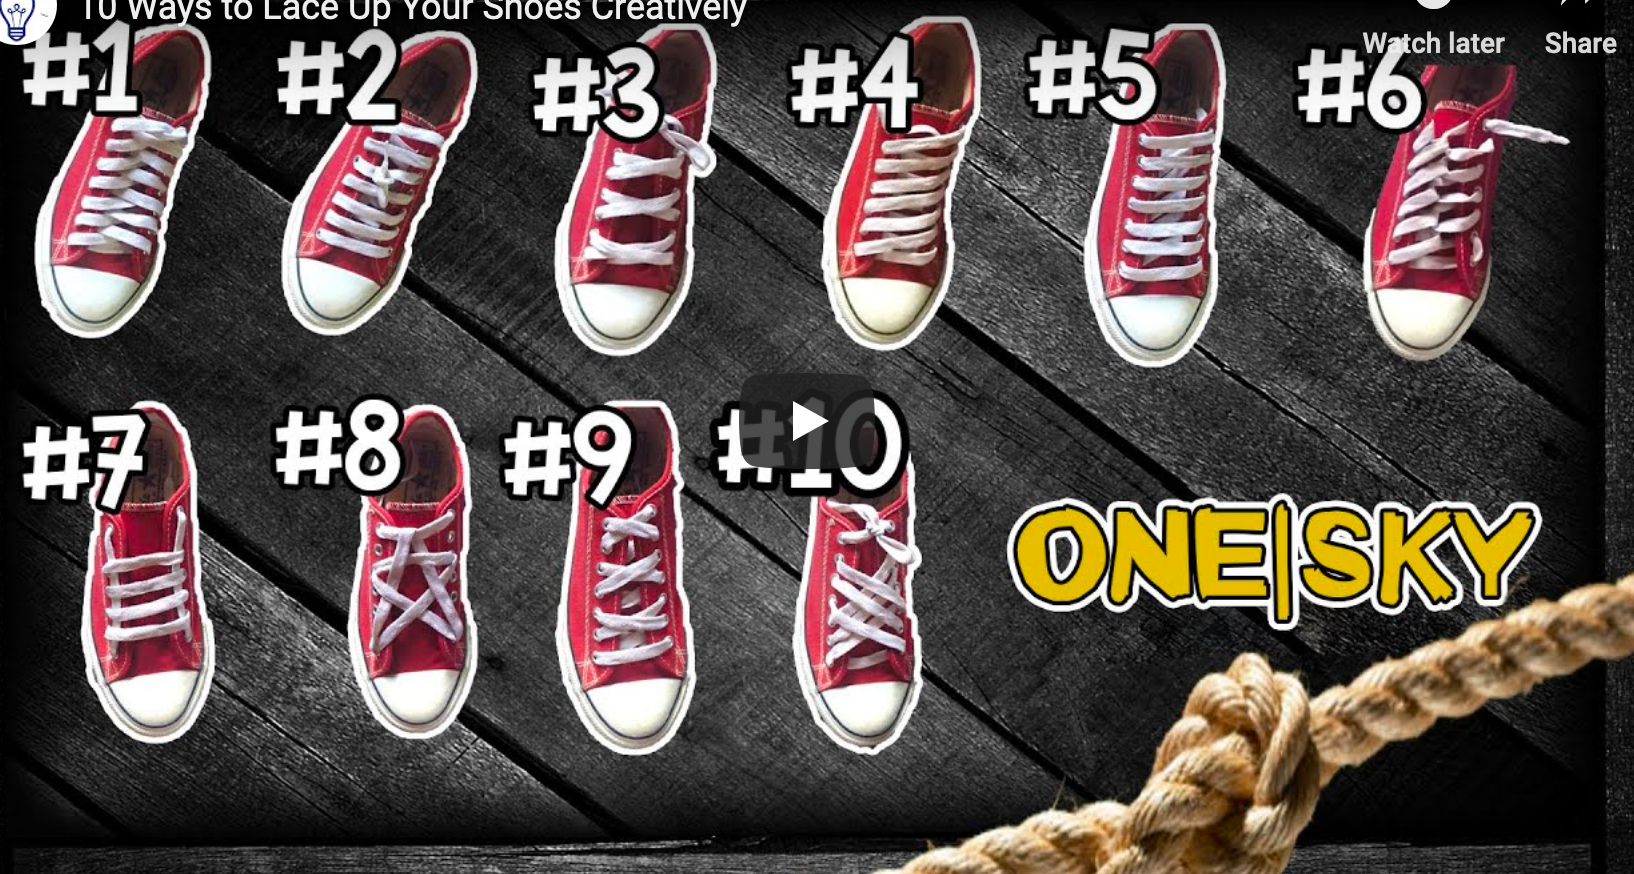 how to lace chuck taylor